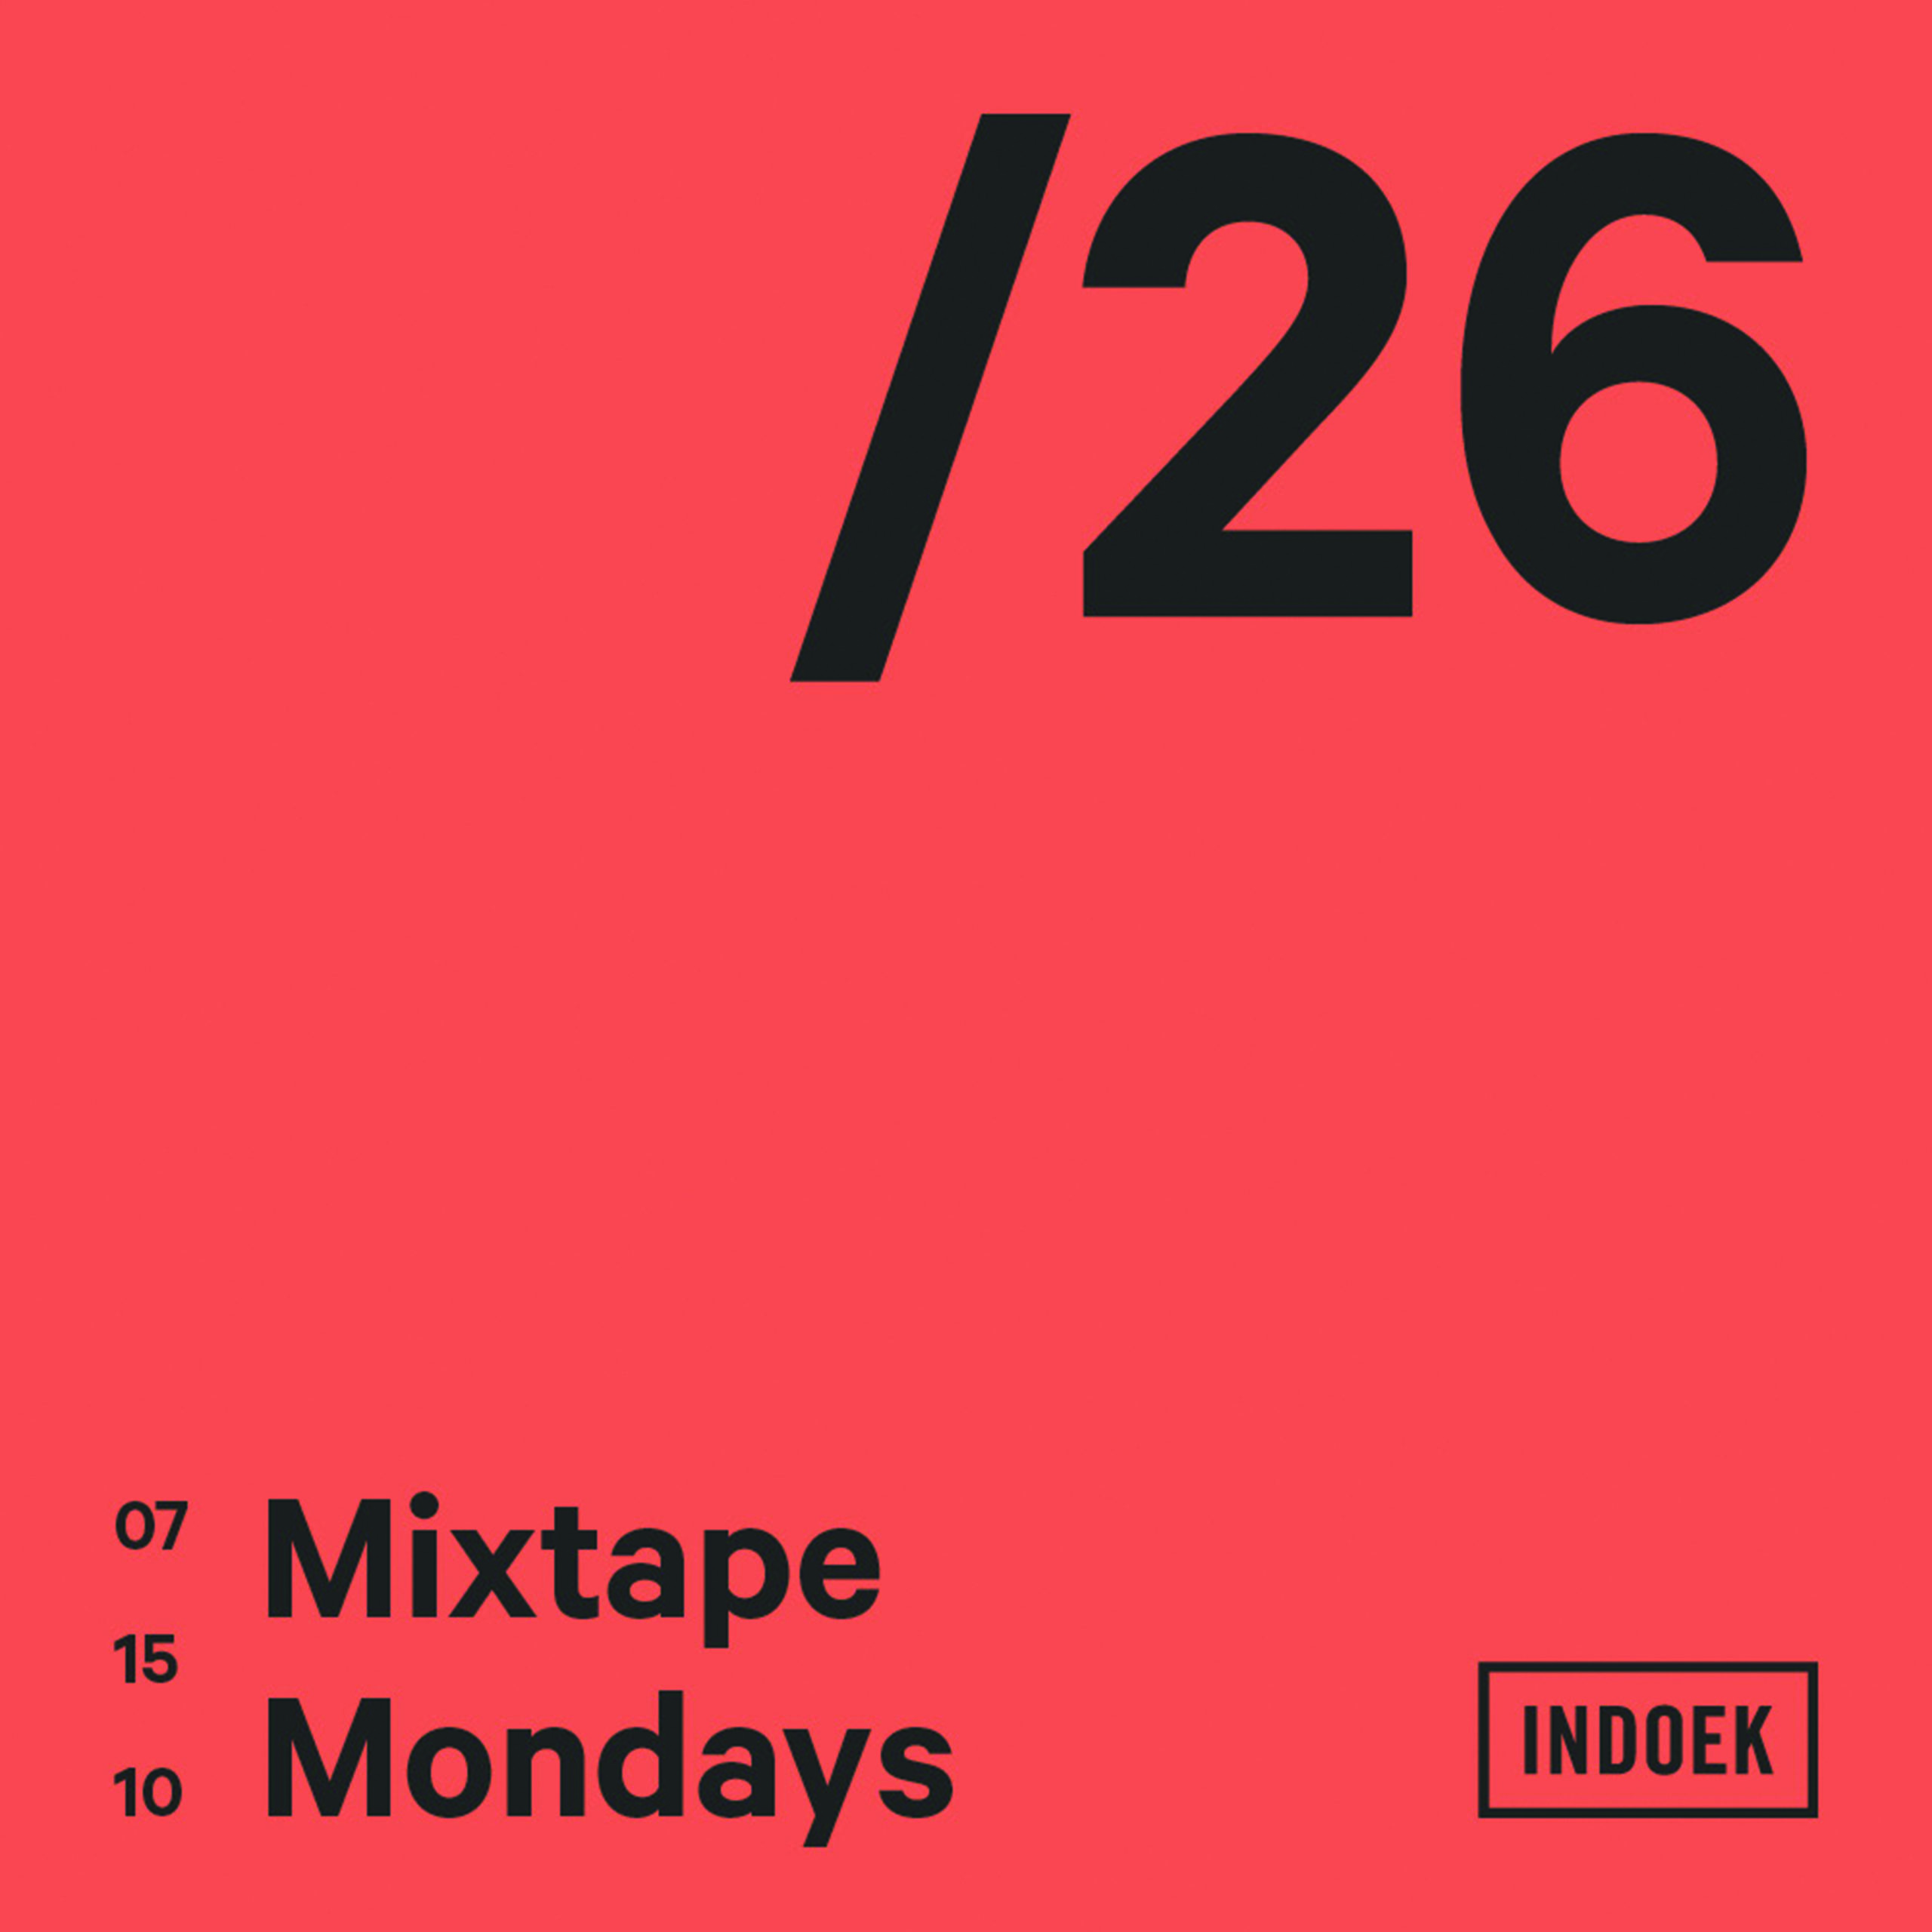 mixtape mondays cover in red and black
